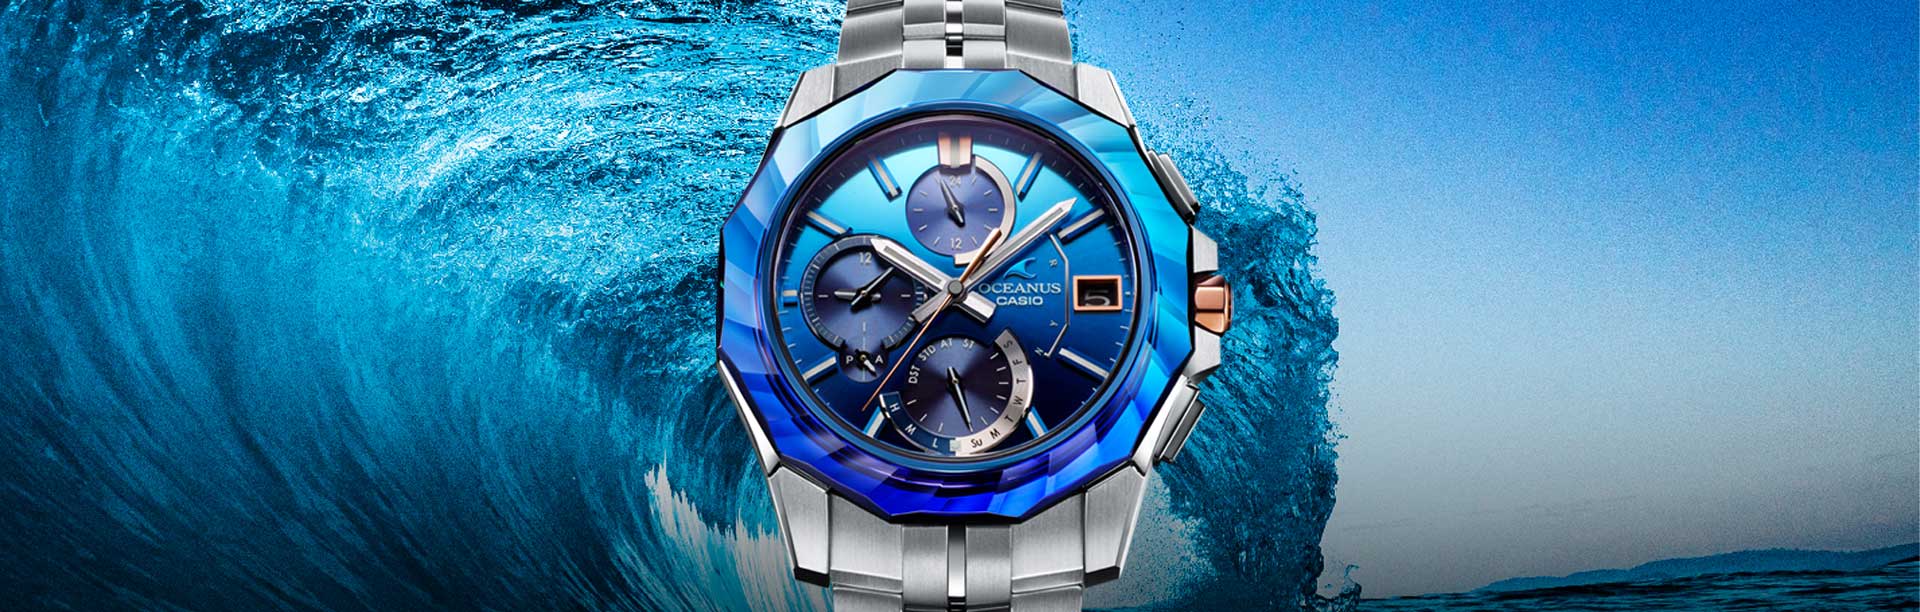 OCEANUS MANTA Series OCW-S6000SW Analog watch with blue bezel in front of a wave